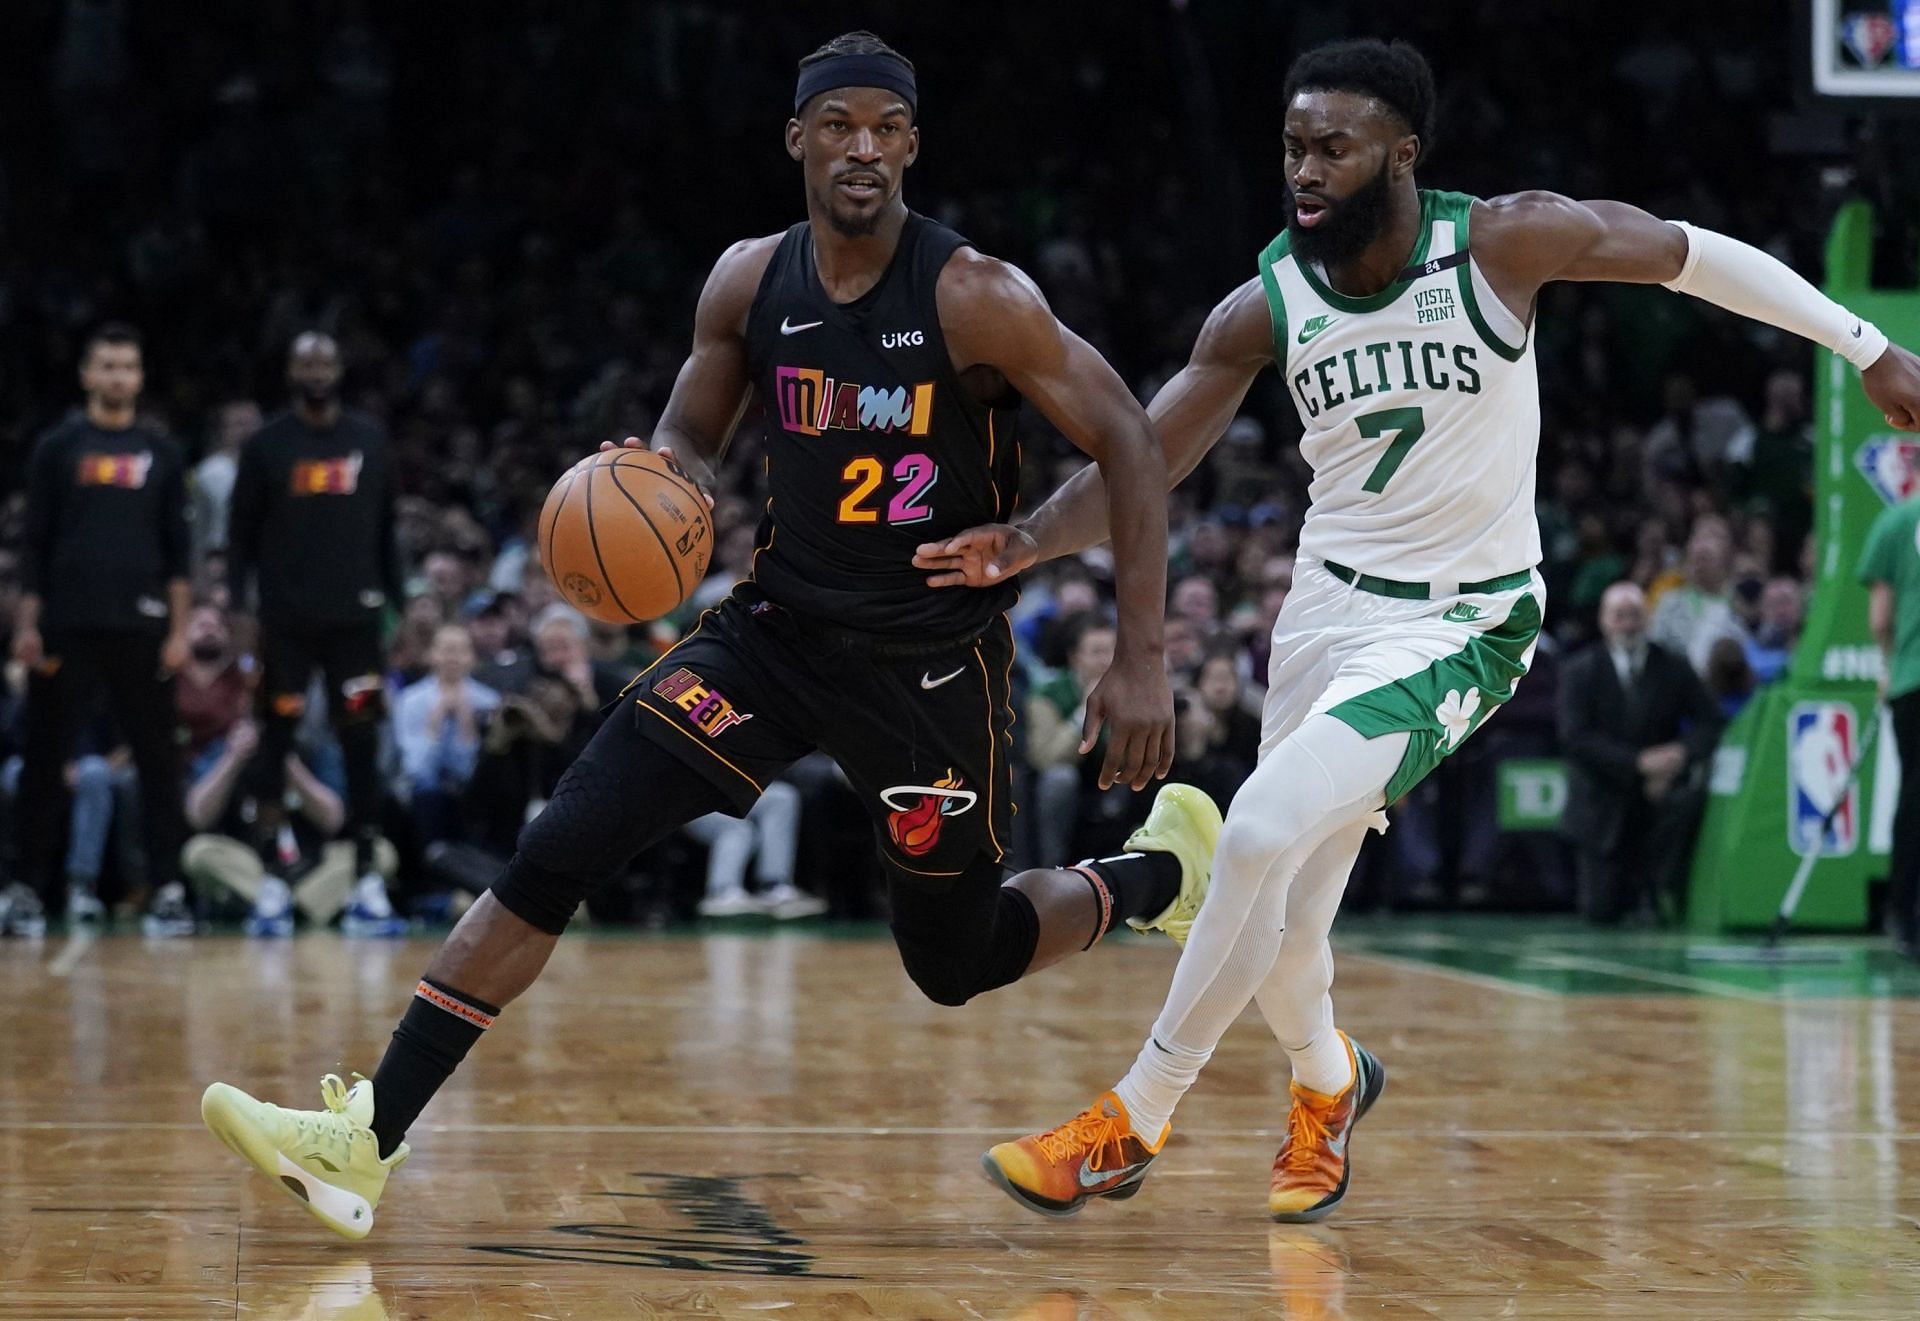 Jimmy Butler cooked Jaylen Brown and the Boston Celtics defense in Game 1. [Photo: Bleacher Report]